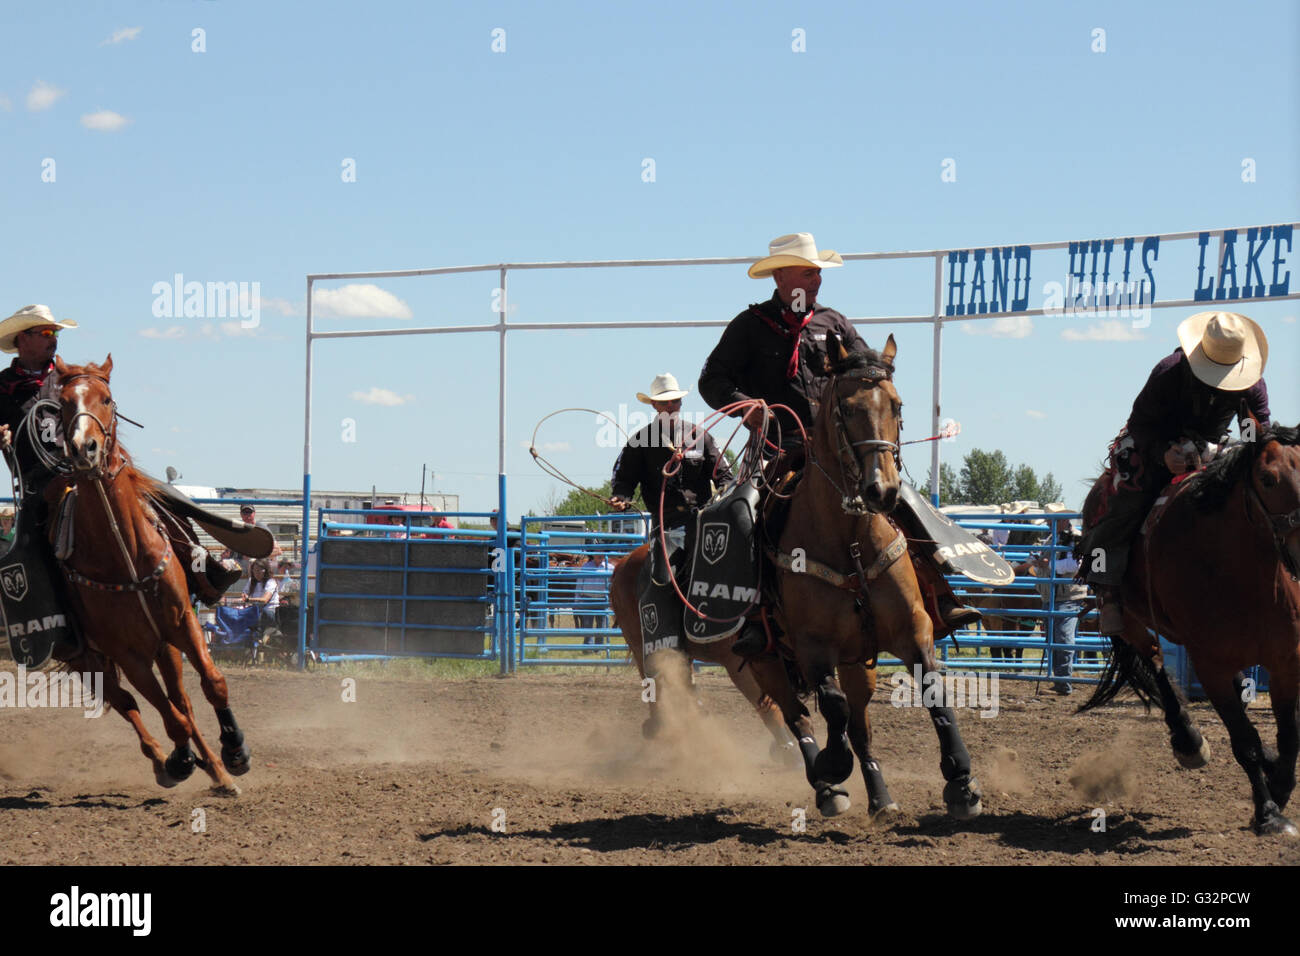 Cowboys in a rodeo in Alberta, Canada Stock Photo